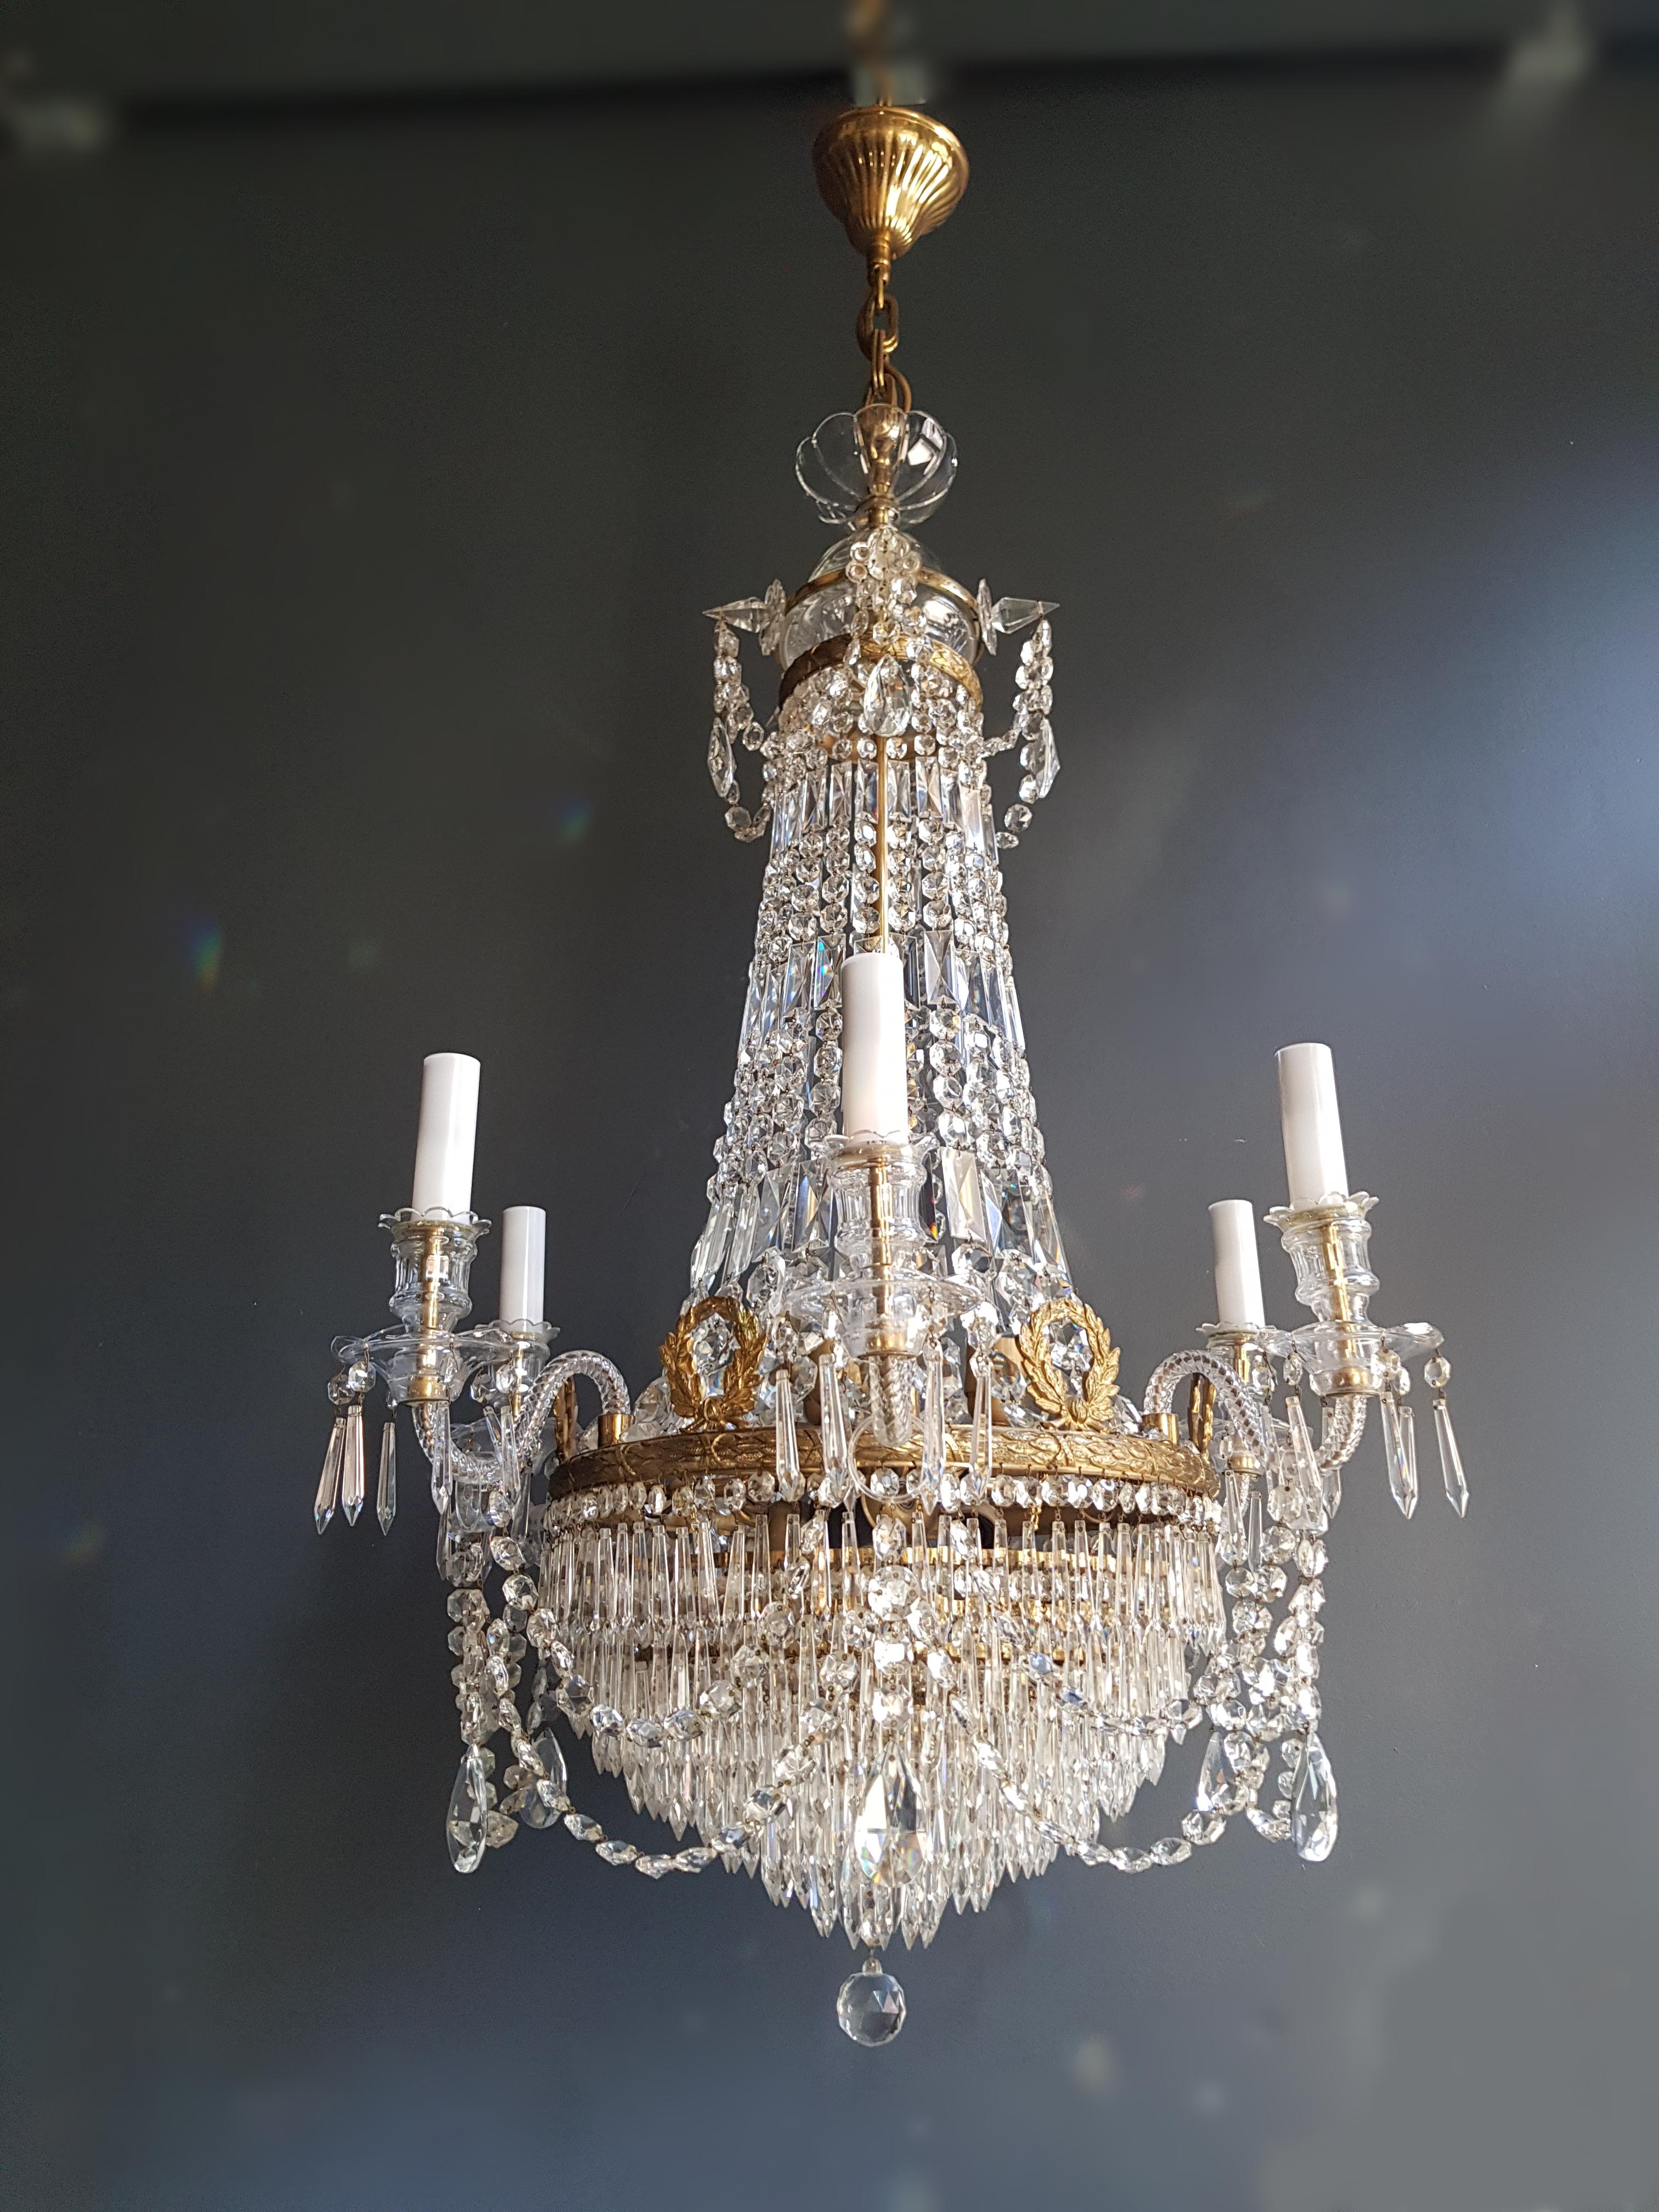 Pair Montgolfièr Empire Sac a Pearl Chandelier Crystal Lustre Ceiling Lamp For Sale 3